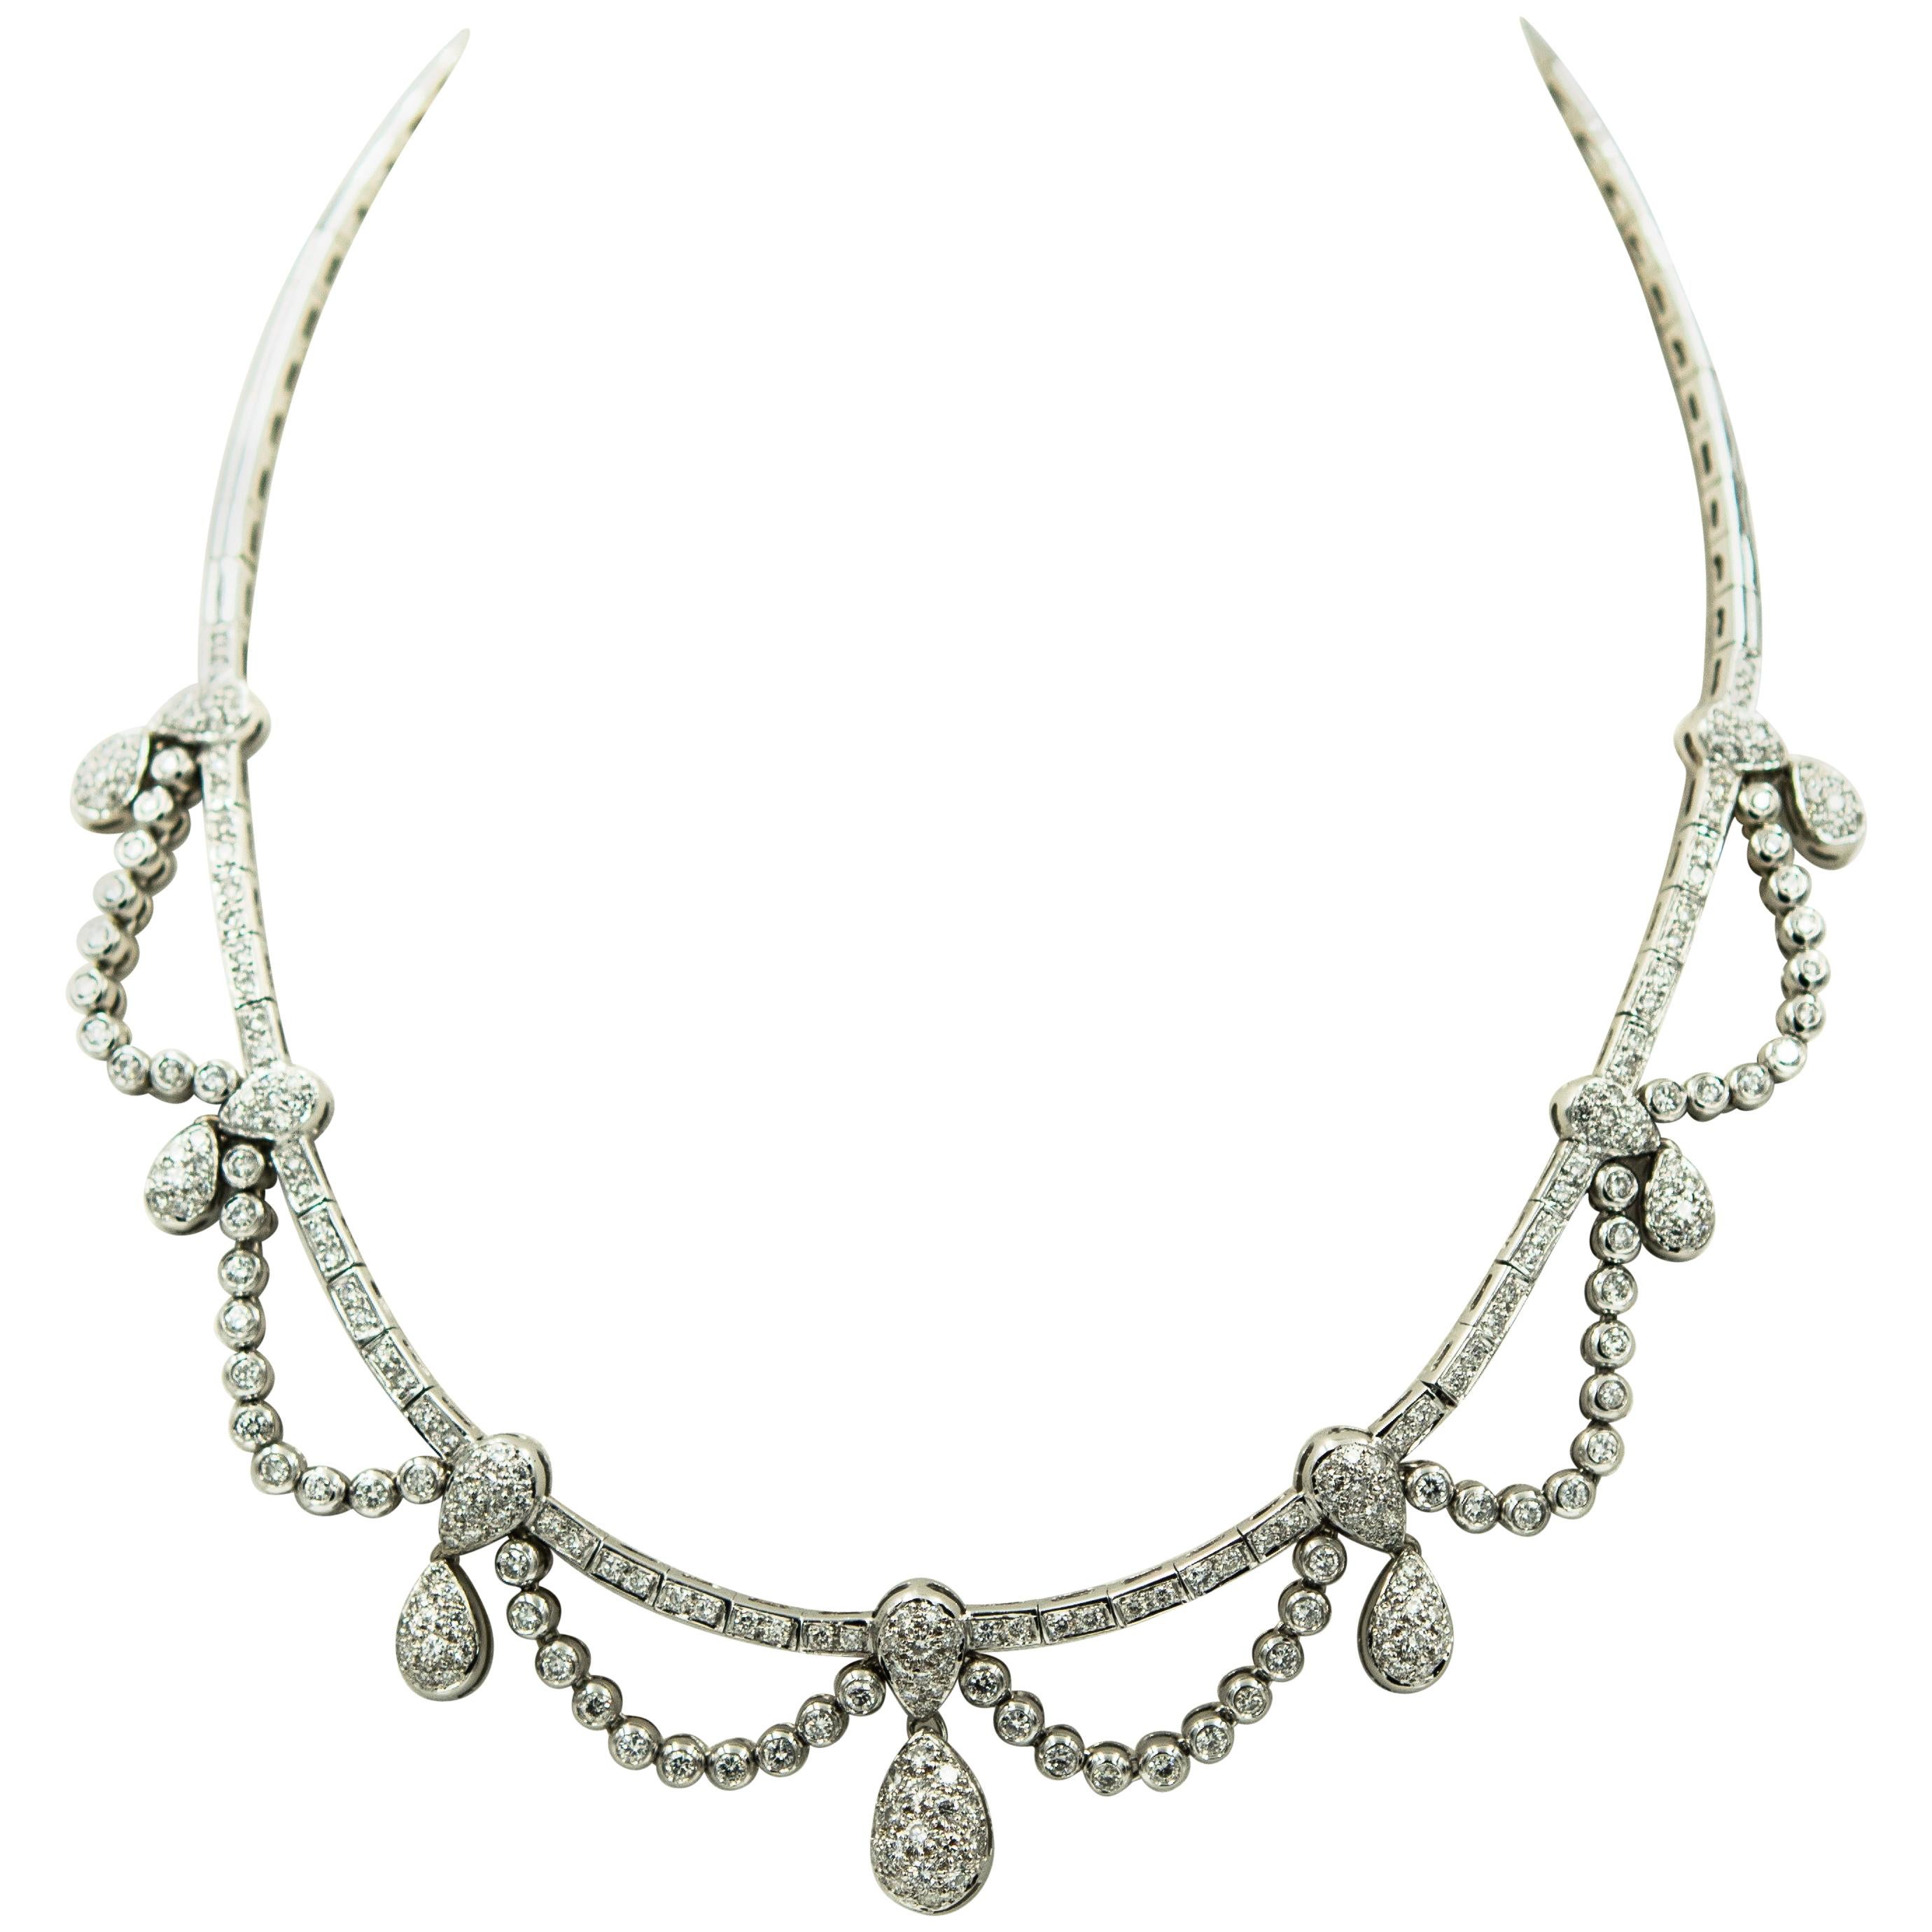 Diamond Garland White Gold Bridal Gala Necklace For Sale